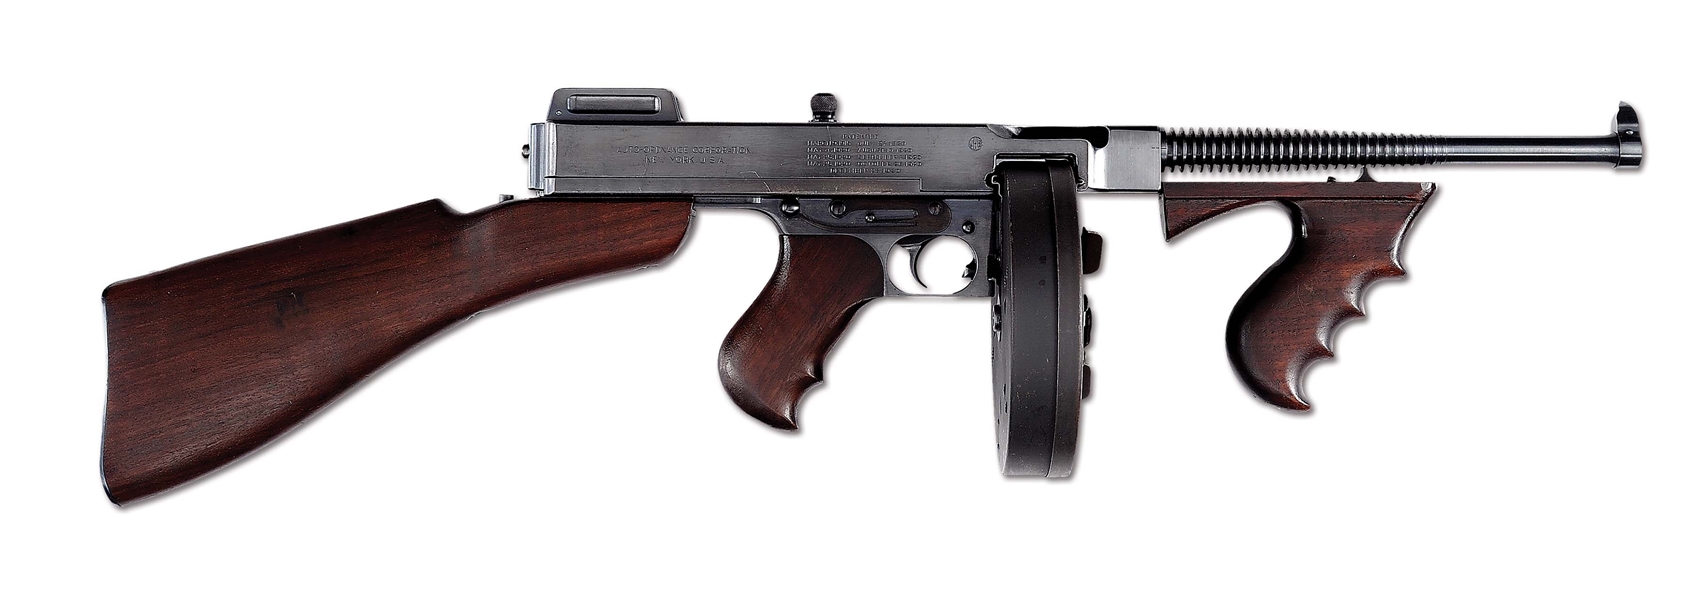 (N) OUTSTANDING CONDITION 1 OF 2 CONSECUTIVELY NUMBERED COLT 1921A THOMPSON MACHINE GUN (CURIO & RELIC). 